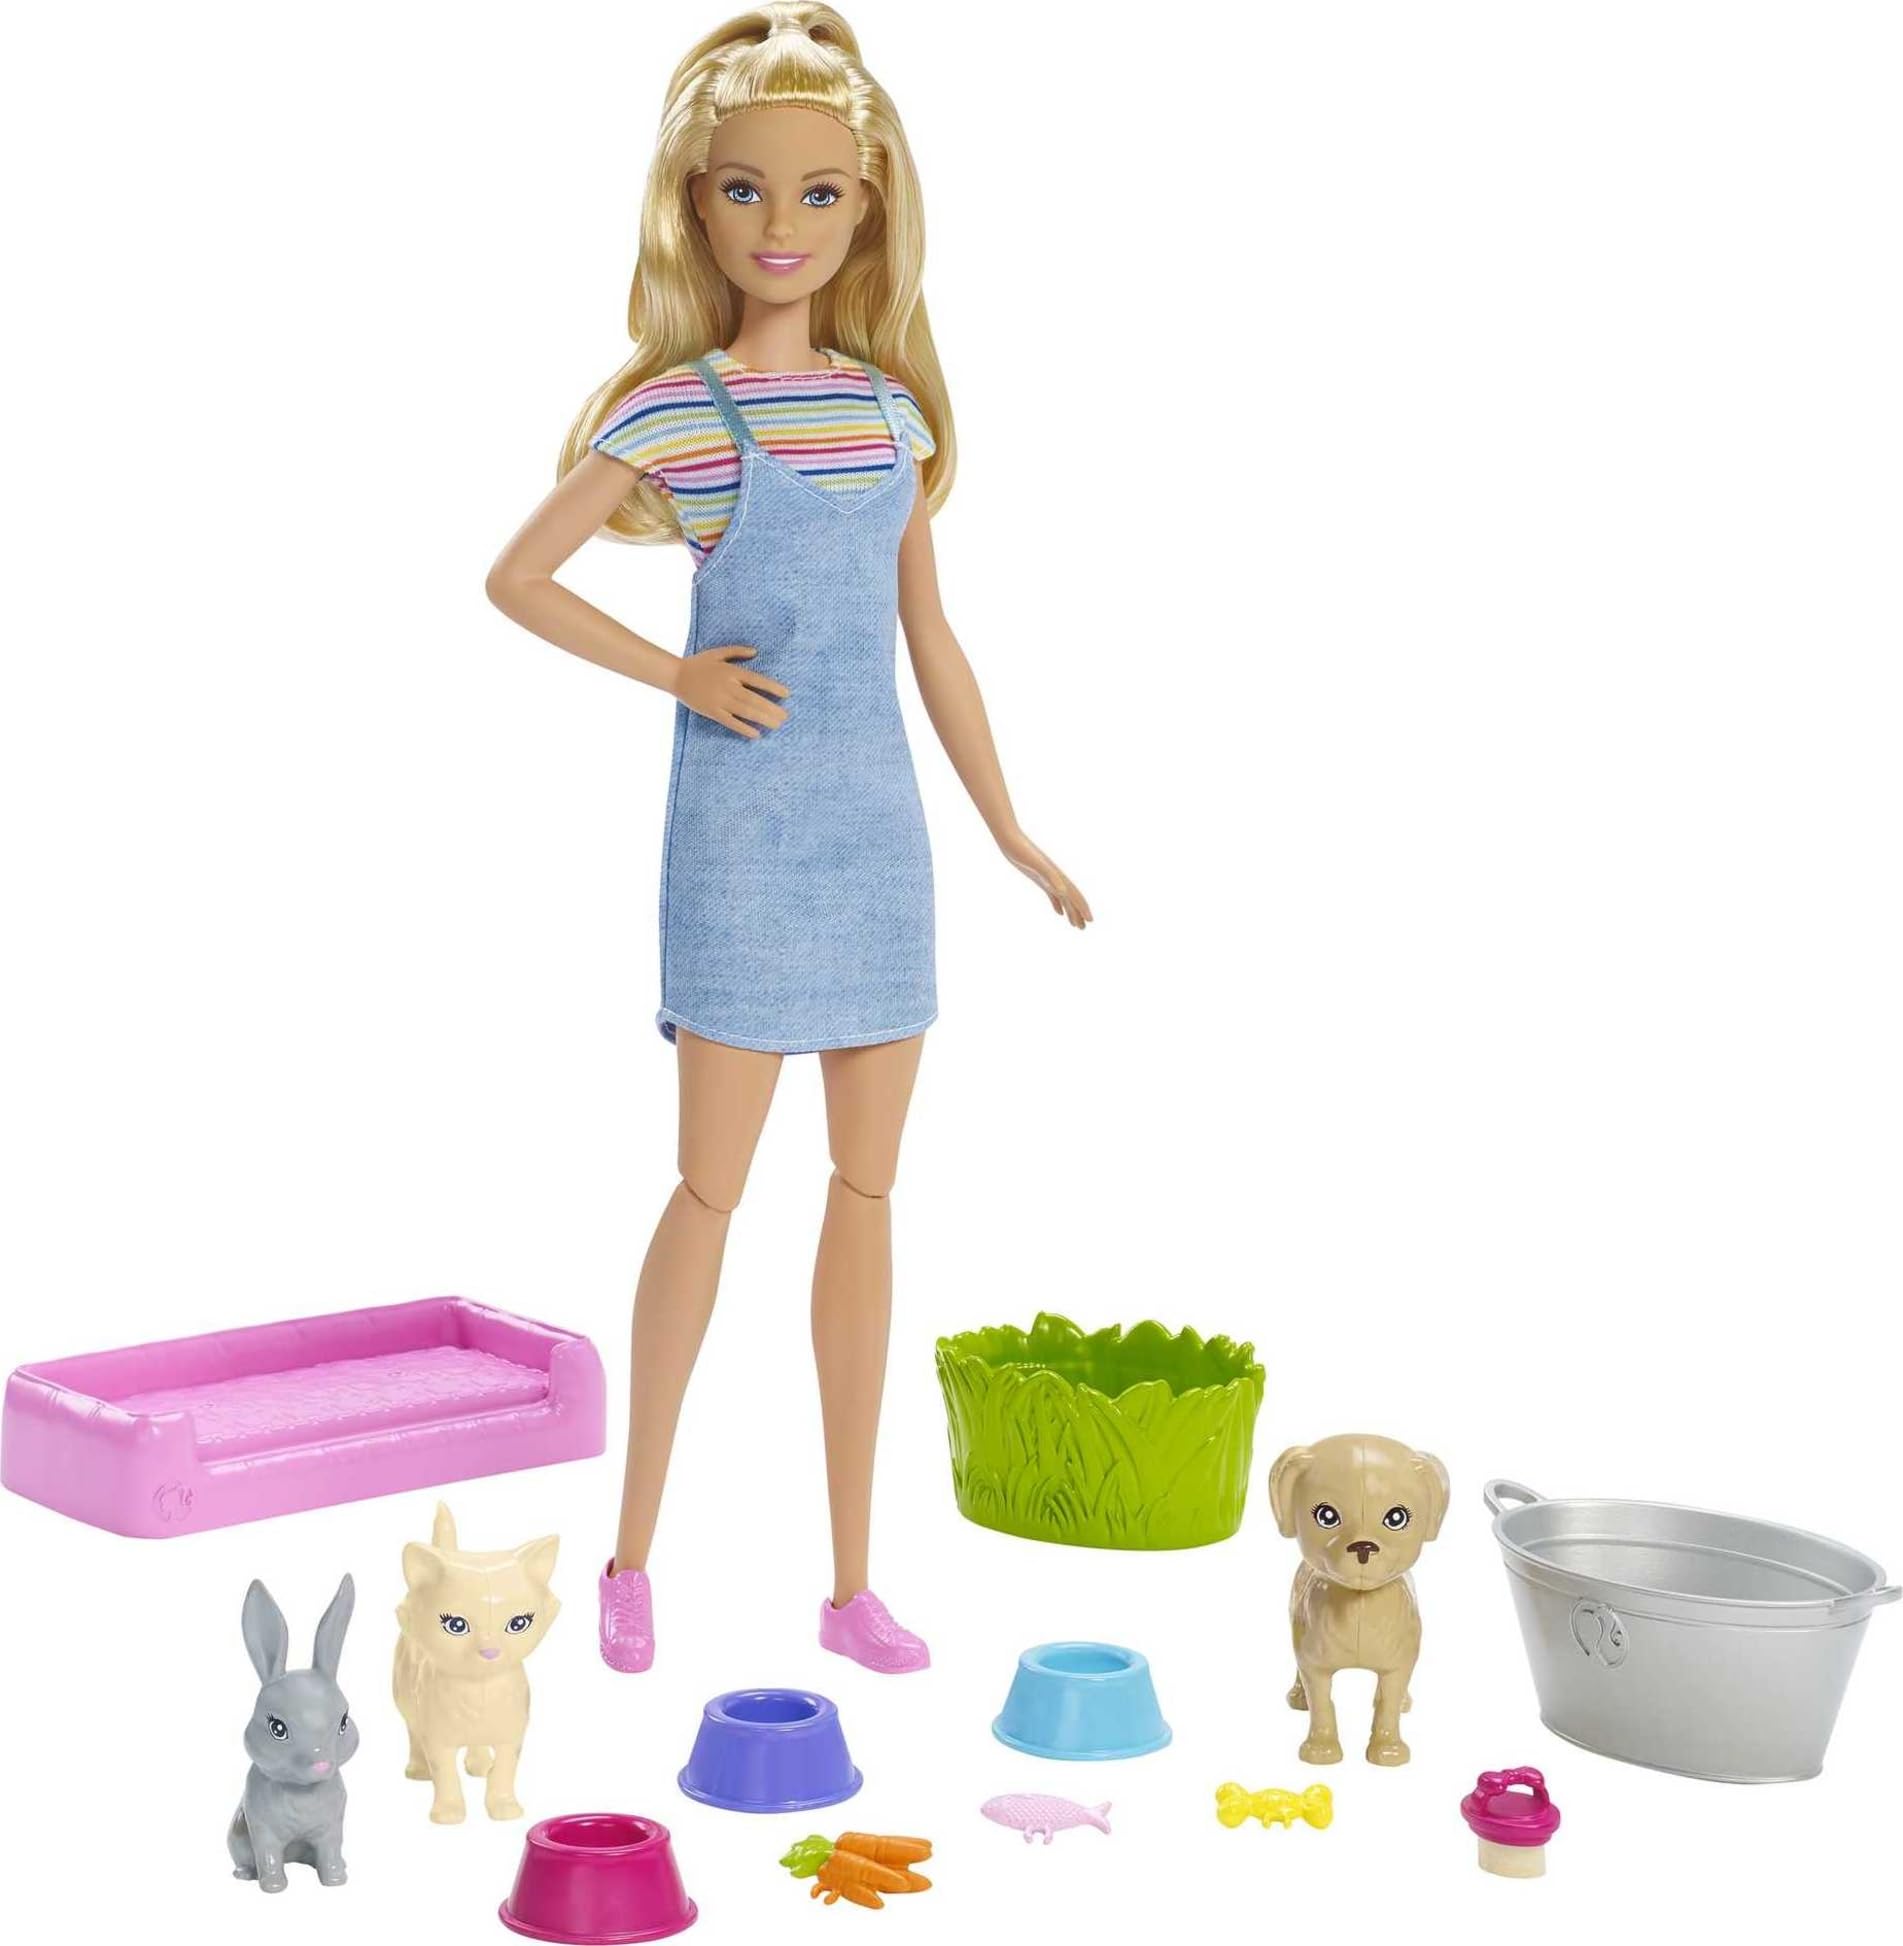 Barbie Play 'N Wash Pets Doll & Playset (w/ 3 Color-Change Animals & 10 Accessories) $10.50 + Free S&H w/ Prime or $25+